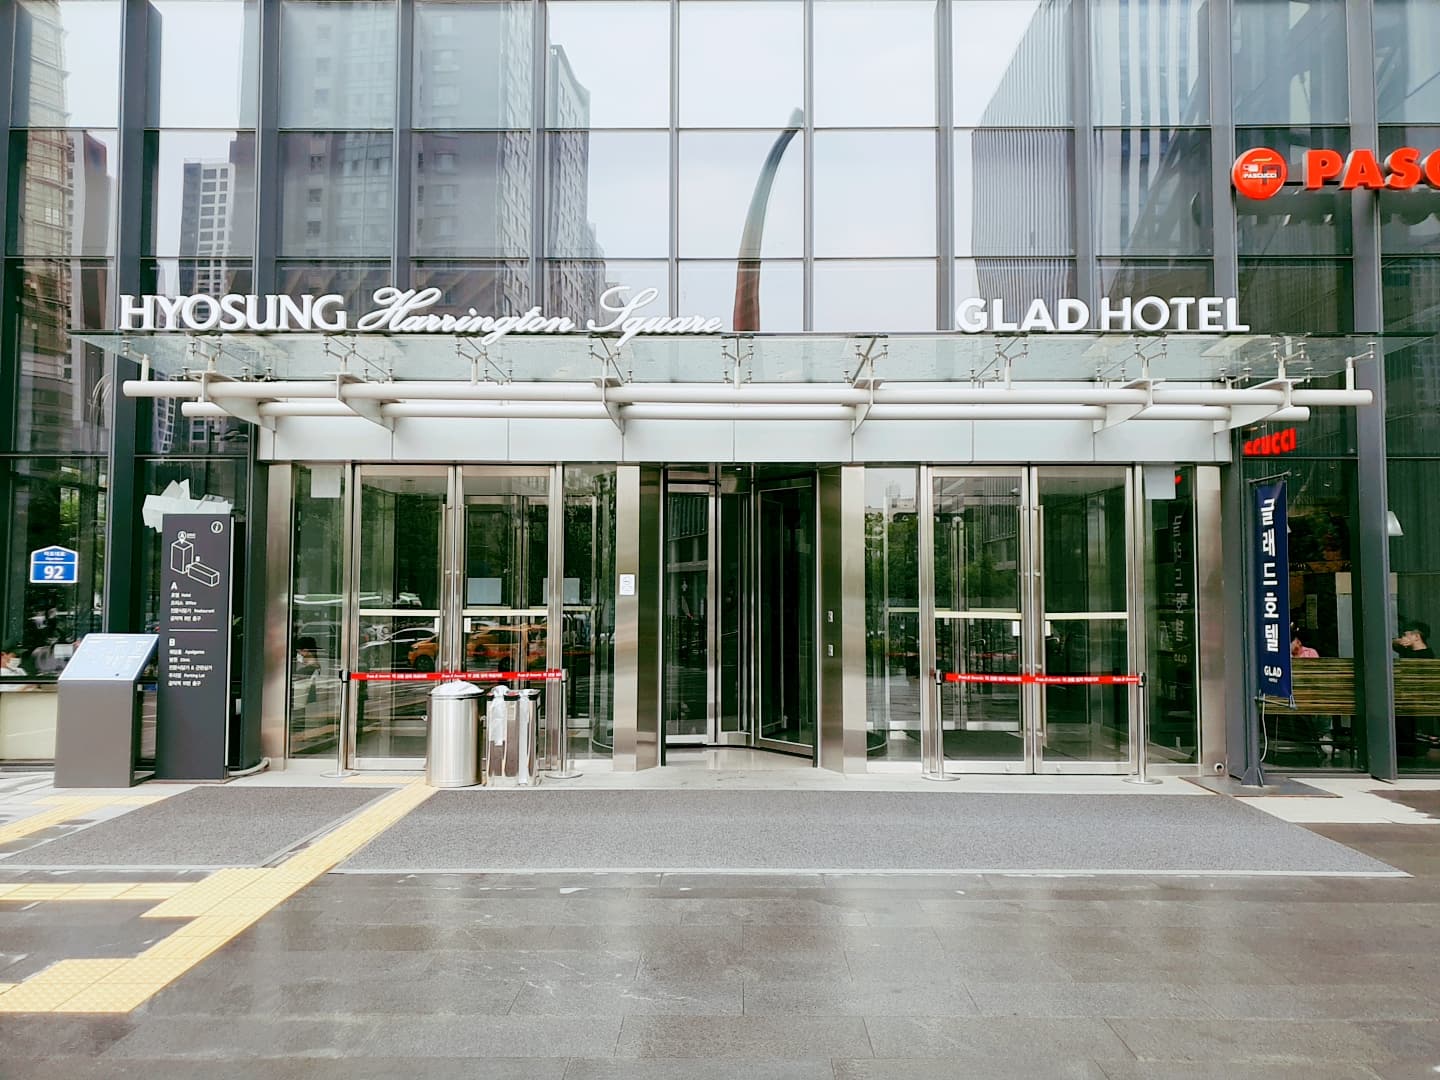 Glad Mapo1 : The main entrance of the hotel from front view